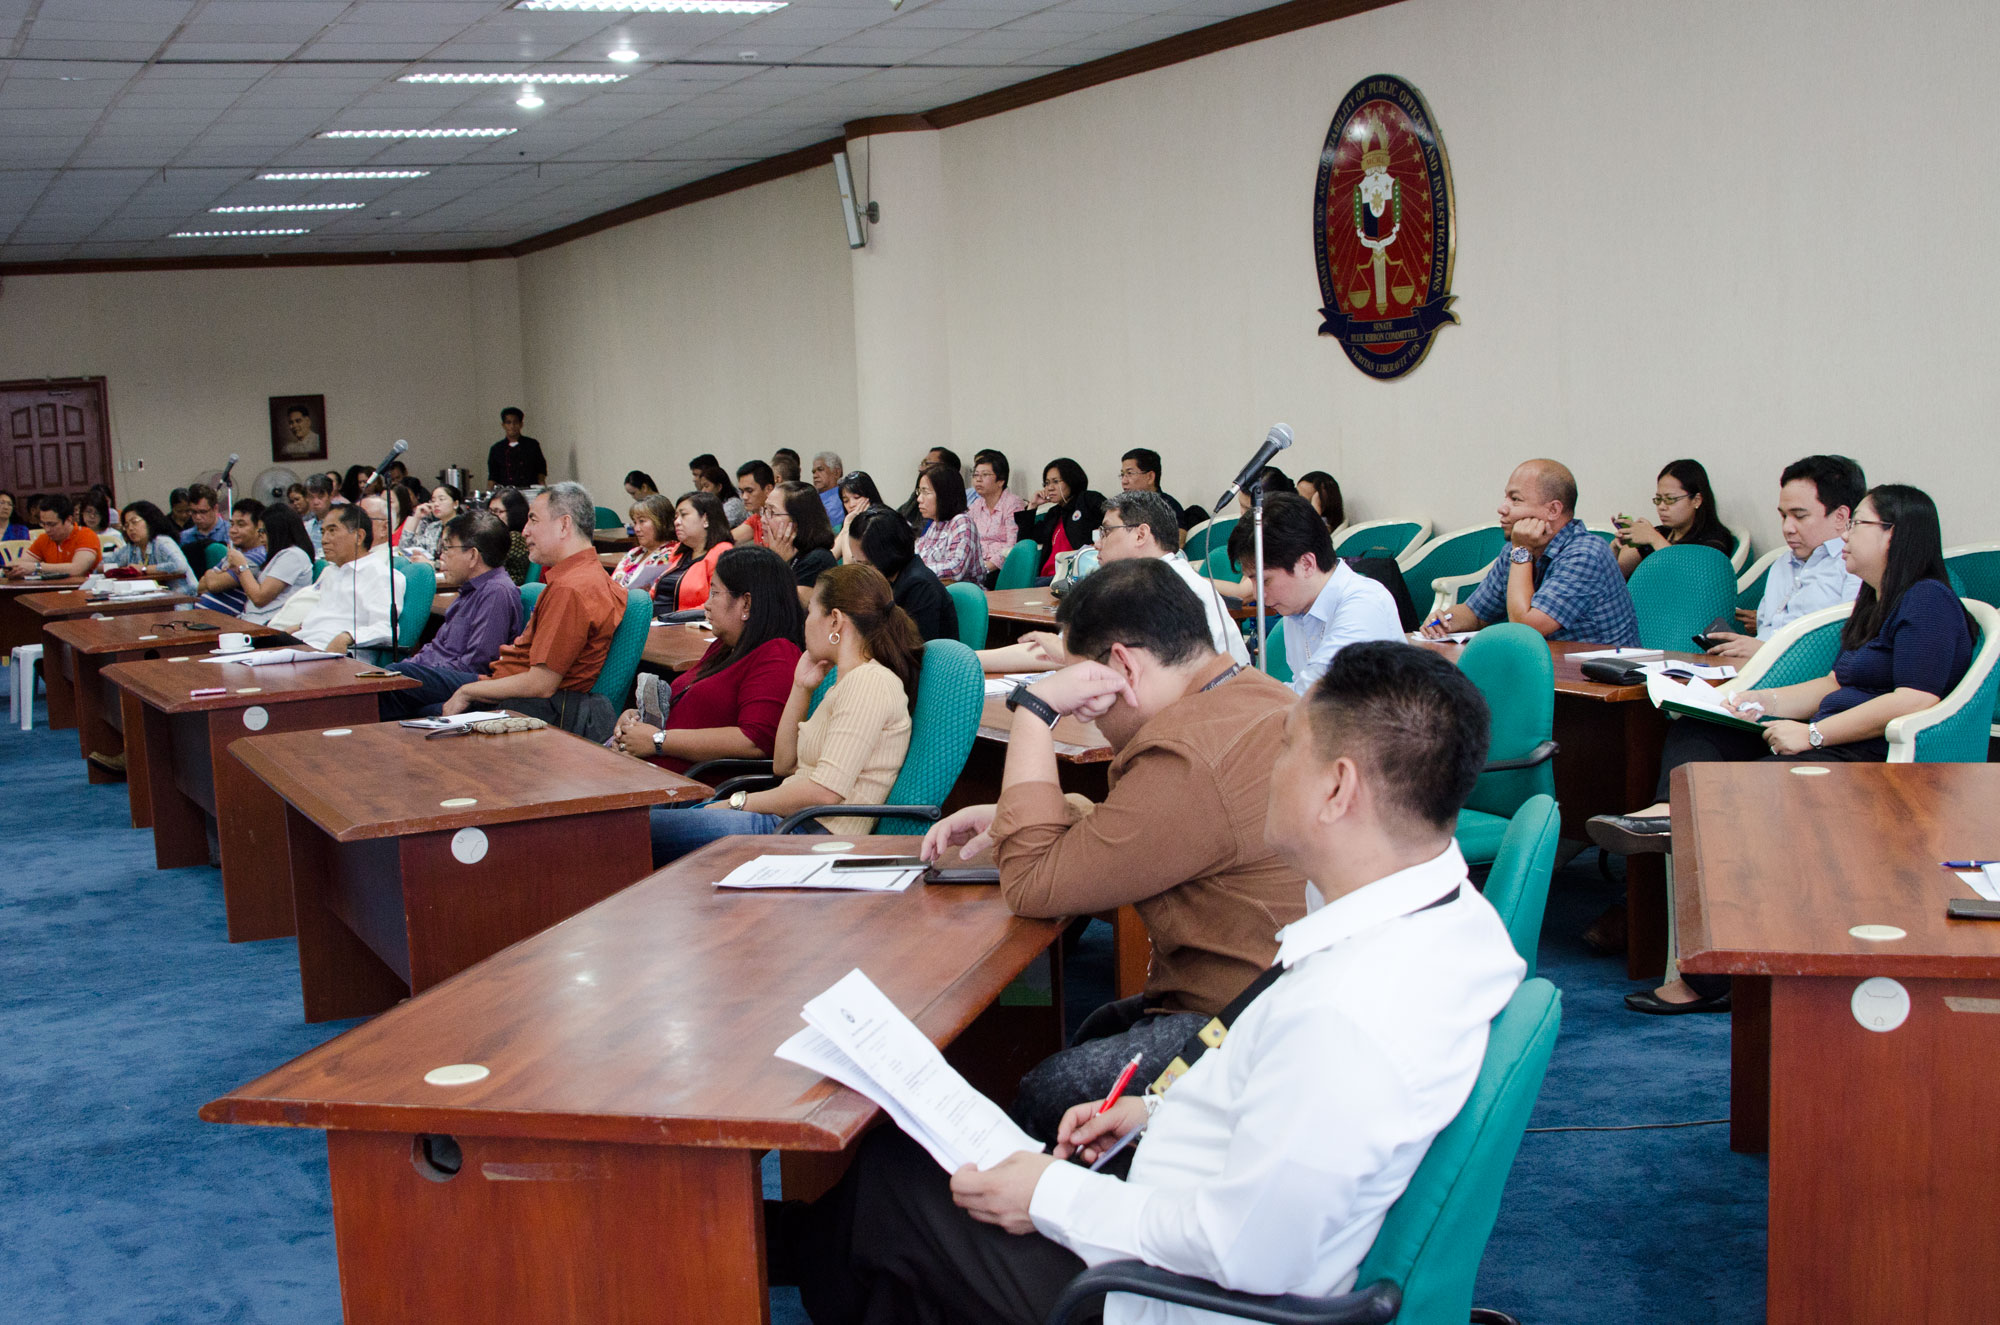 Senate Centennial Lecture Series Assessment Of The Bottom-Up Budgeting Process For FY 2015-GGM_7948.jpg